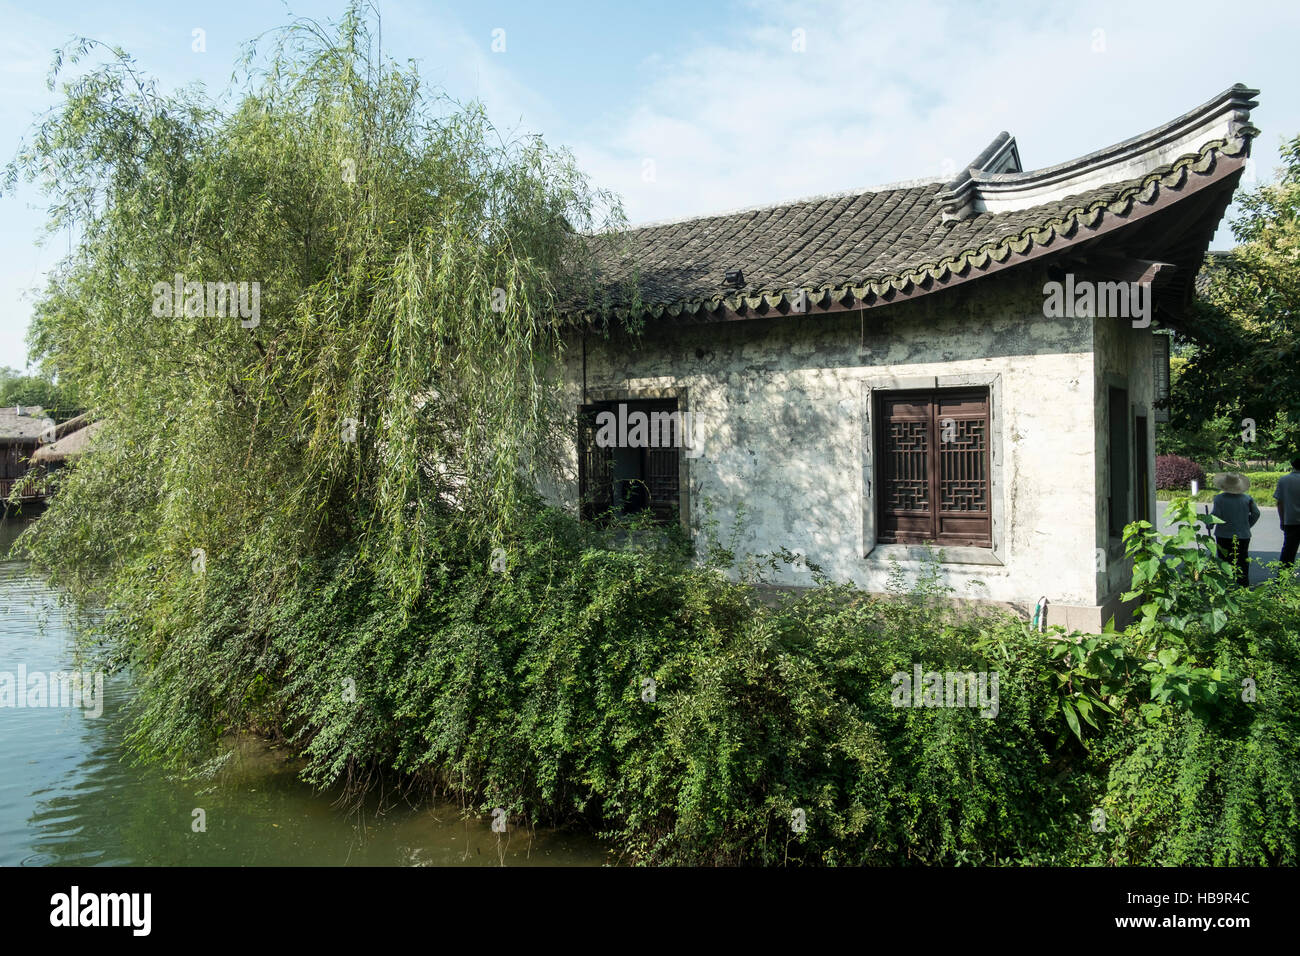 Ancient house near the river in Wuzhen town, Zhejiang province, China Stock Photo